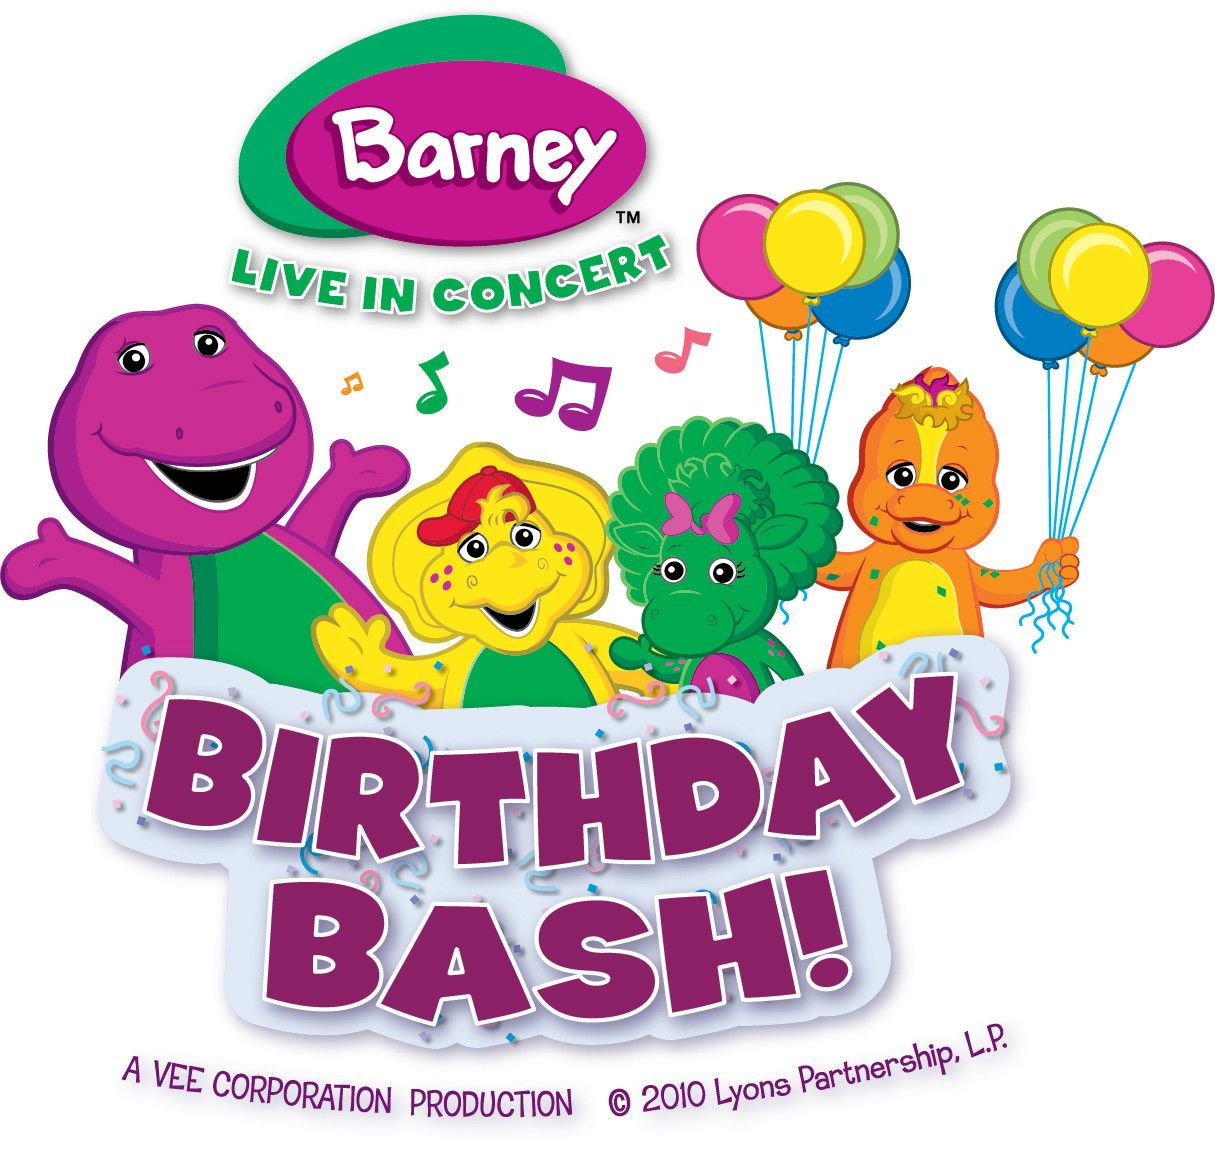 Barney Live in Concert - Birthday Bash! is Barney's seventh/final ...